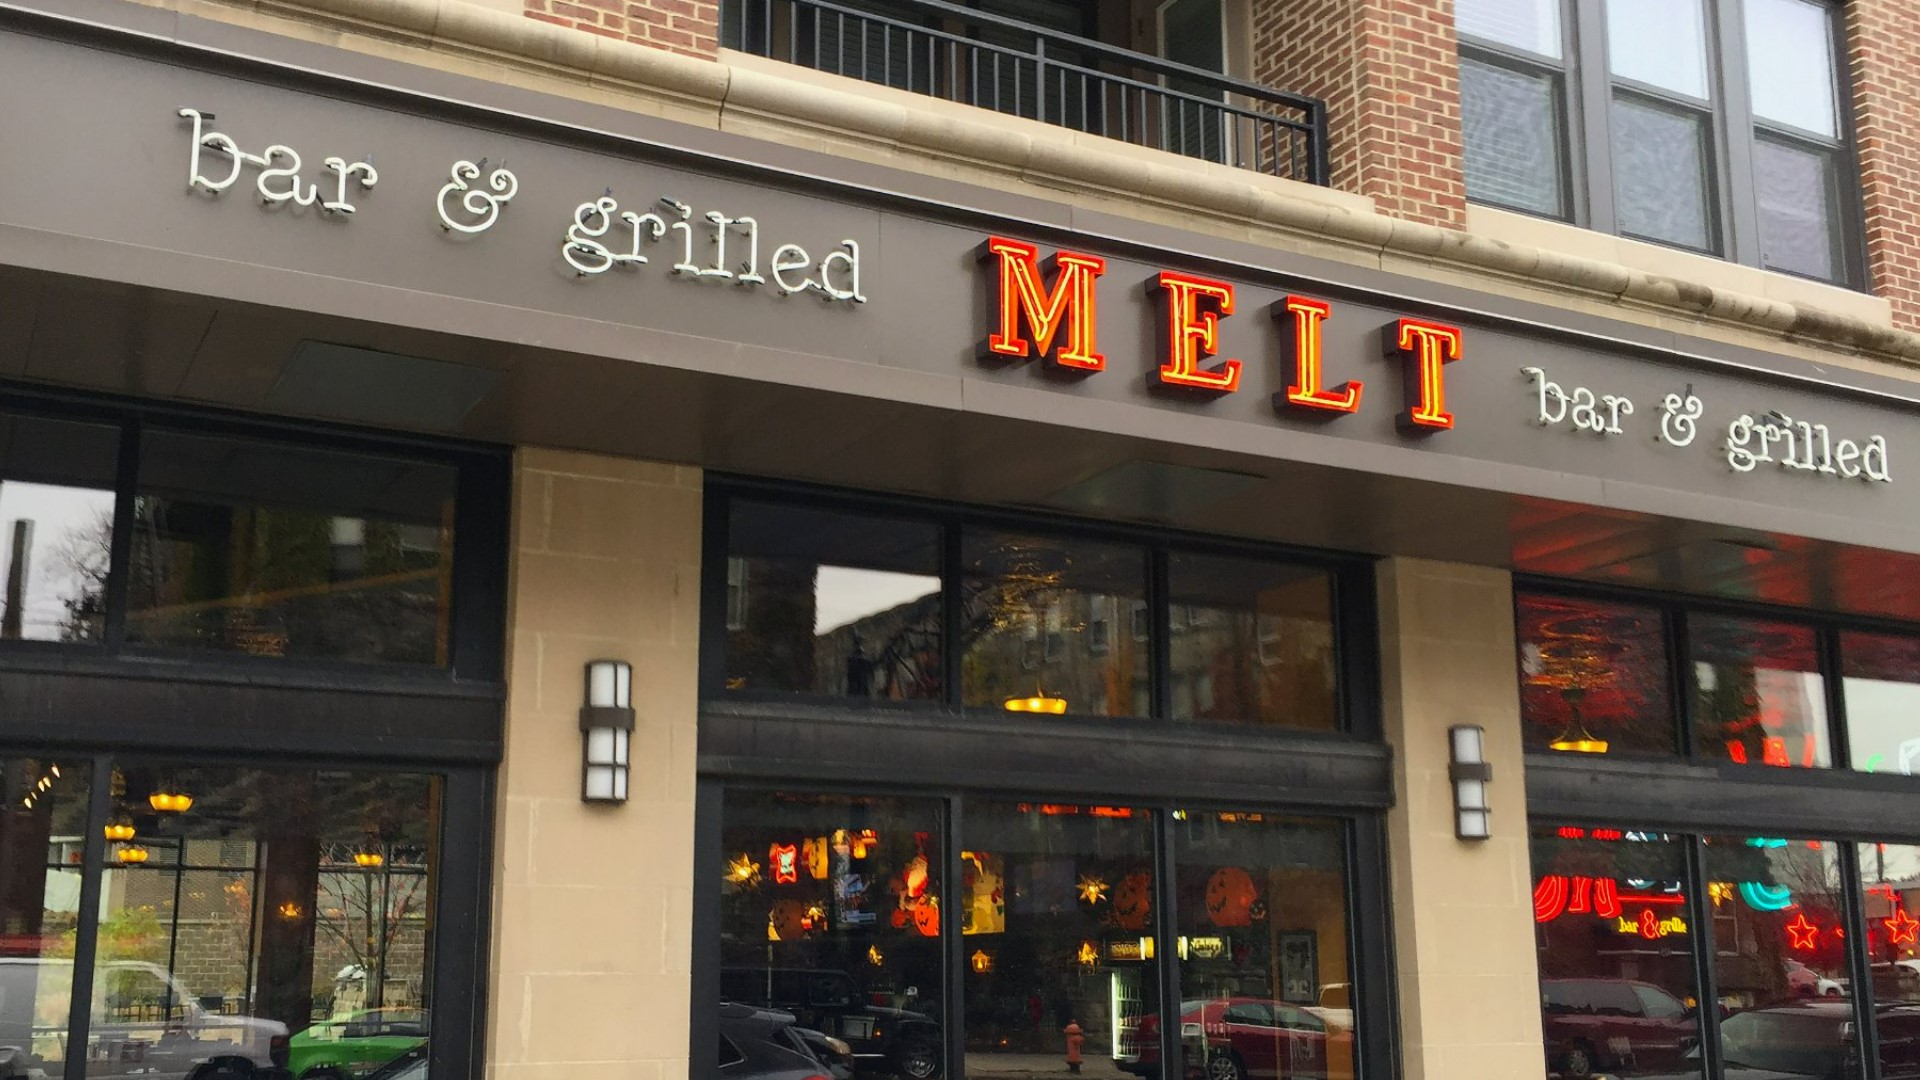 Citing staffing issues and cost increases, the owner of Melt Bar and Grilled announced Monday the Short North location is now permanently closed.